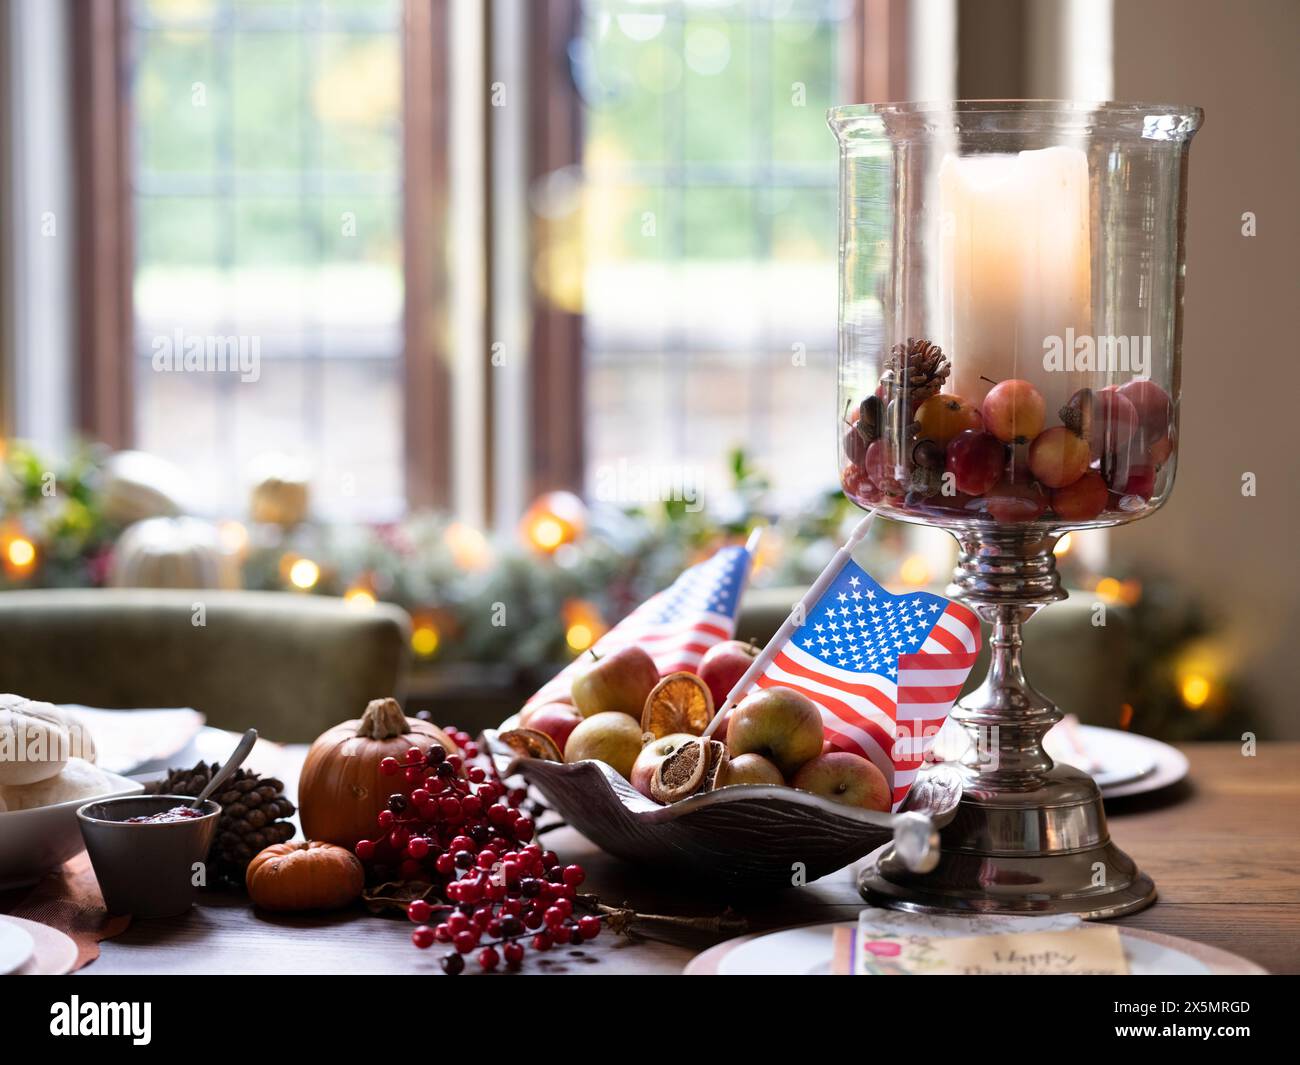 Thanksgiving decorations and American flag on table Stock Photo